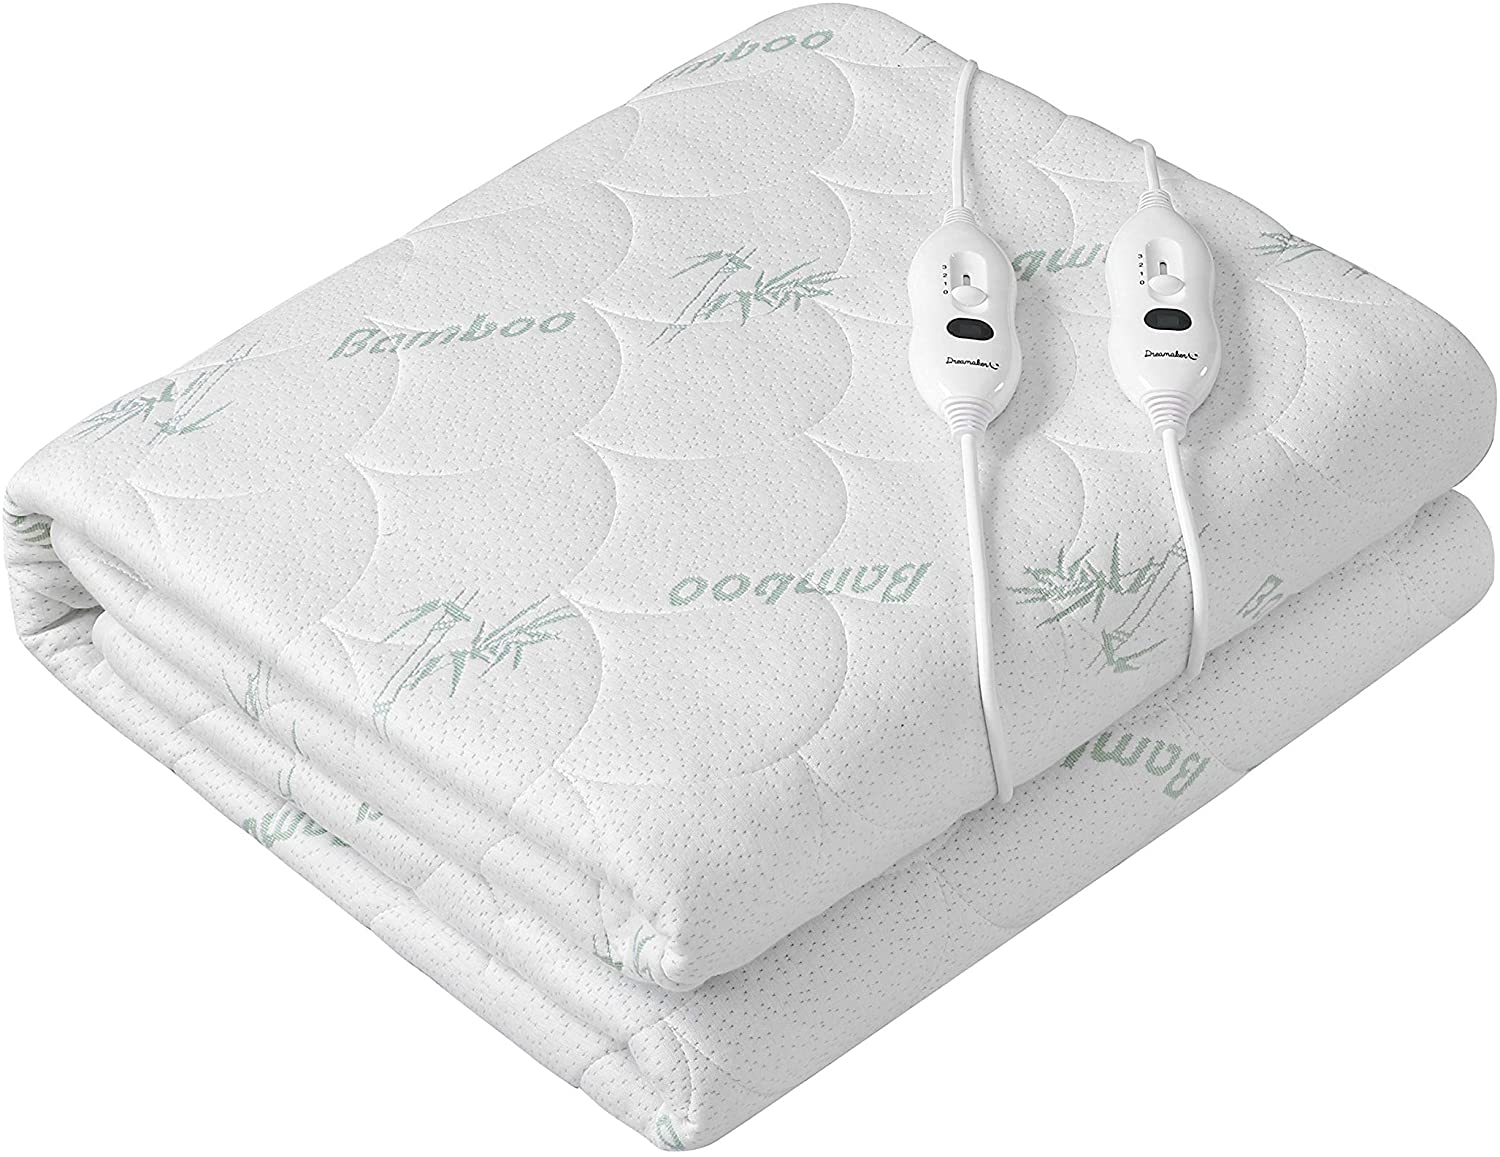 Bamboo Covered Top Electric Blanket